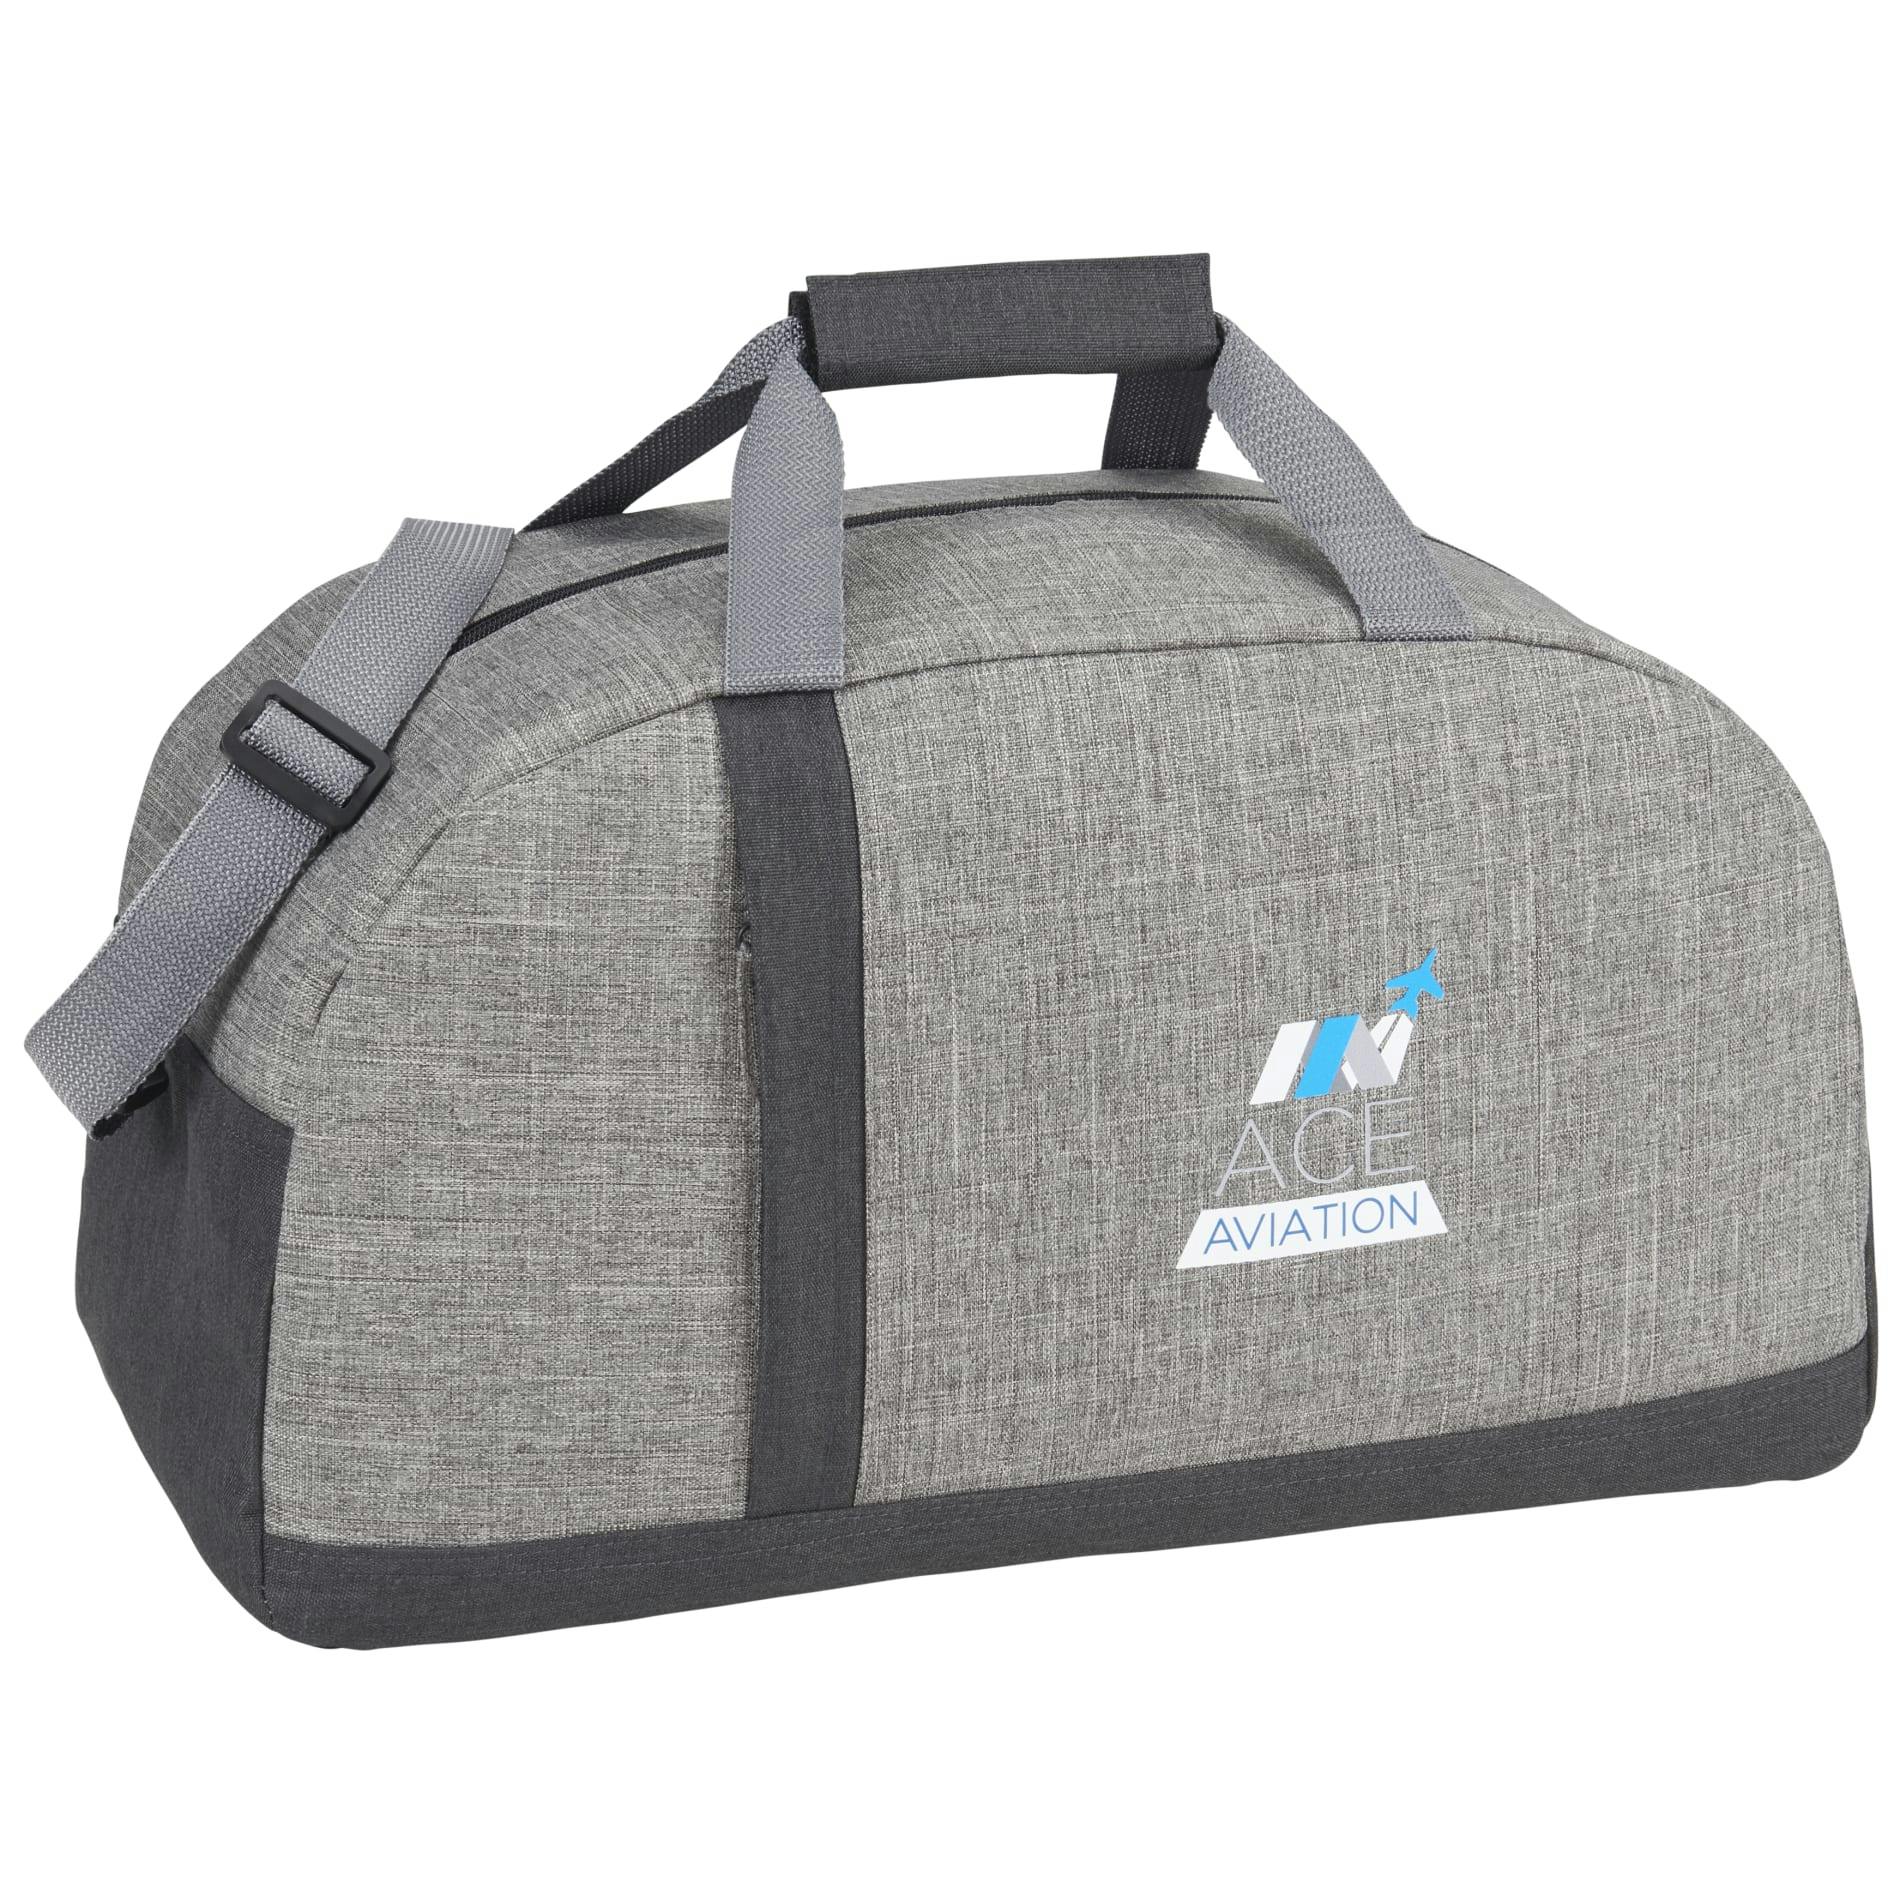 Reclaim Recycled Sport Duffel - additional Image 5